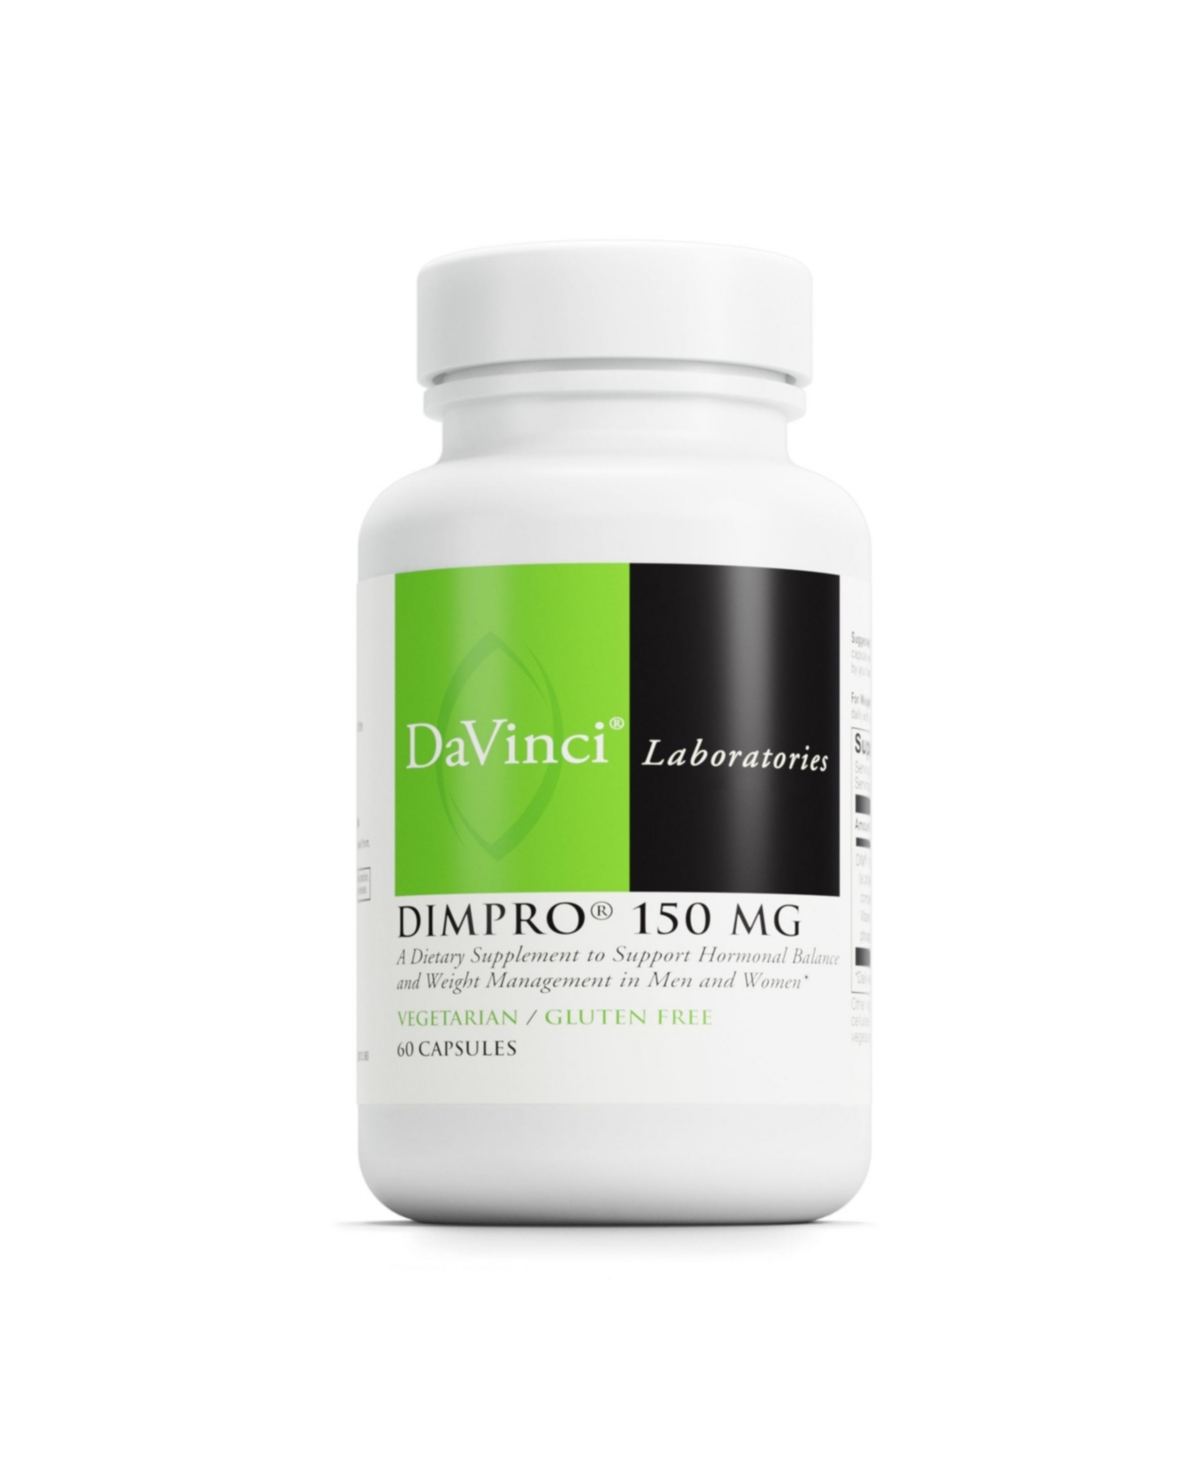 DaVinci Labs DimPro 150 mg - Dietary Supplement to Support Hormonal Balance in Men & Women & Healthy Weight Management - With Vit